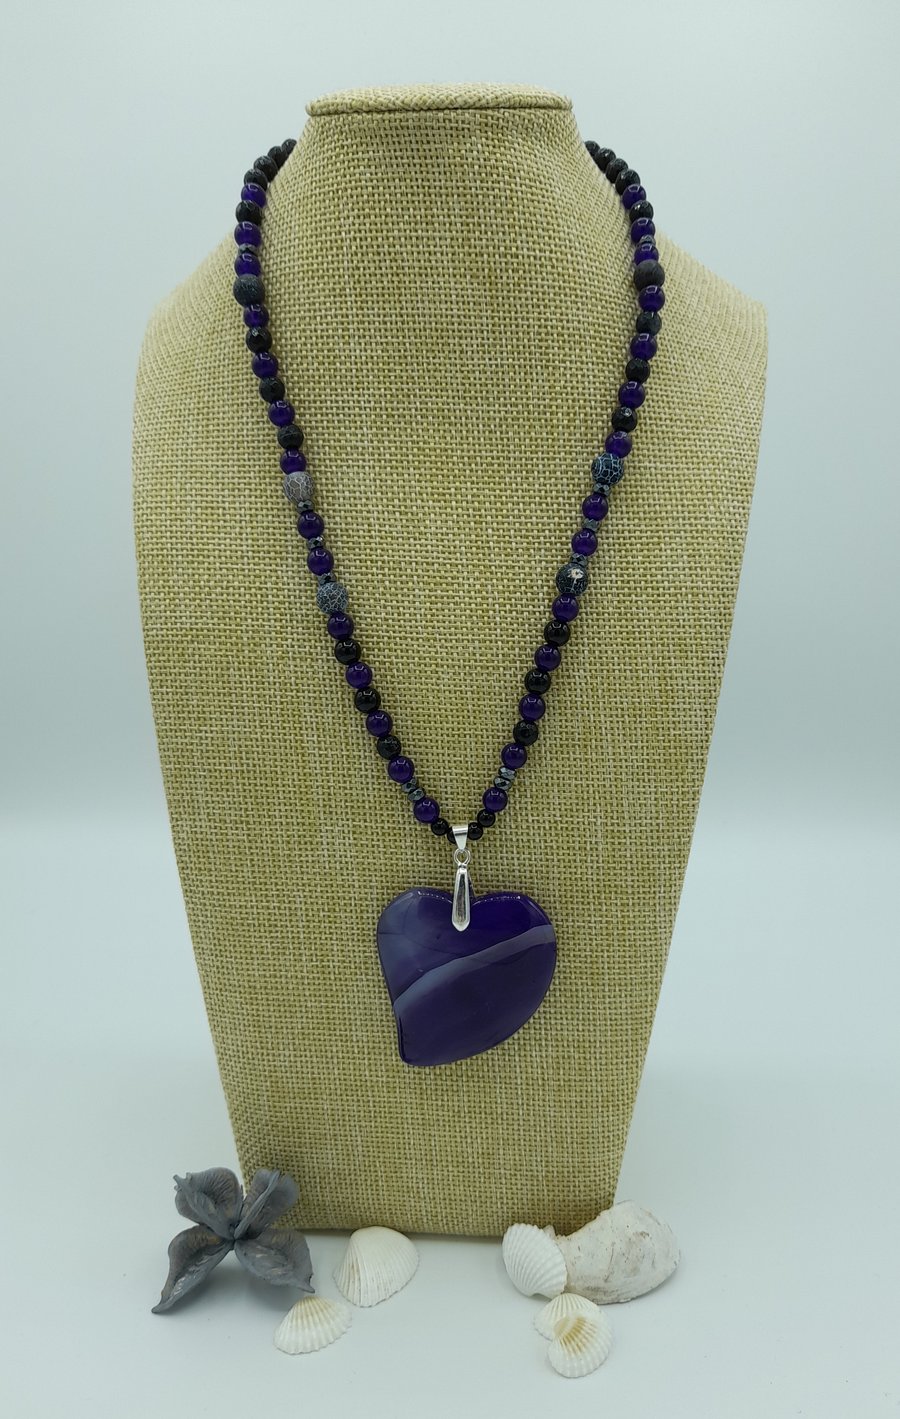 Quirky Purple heart necklace